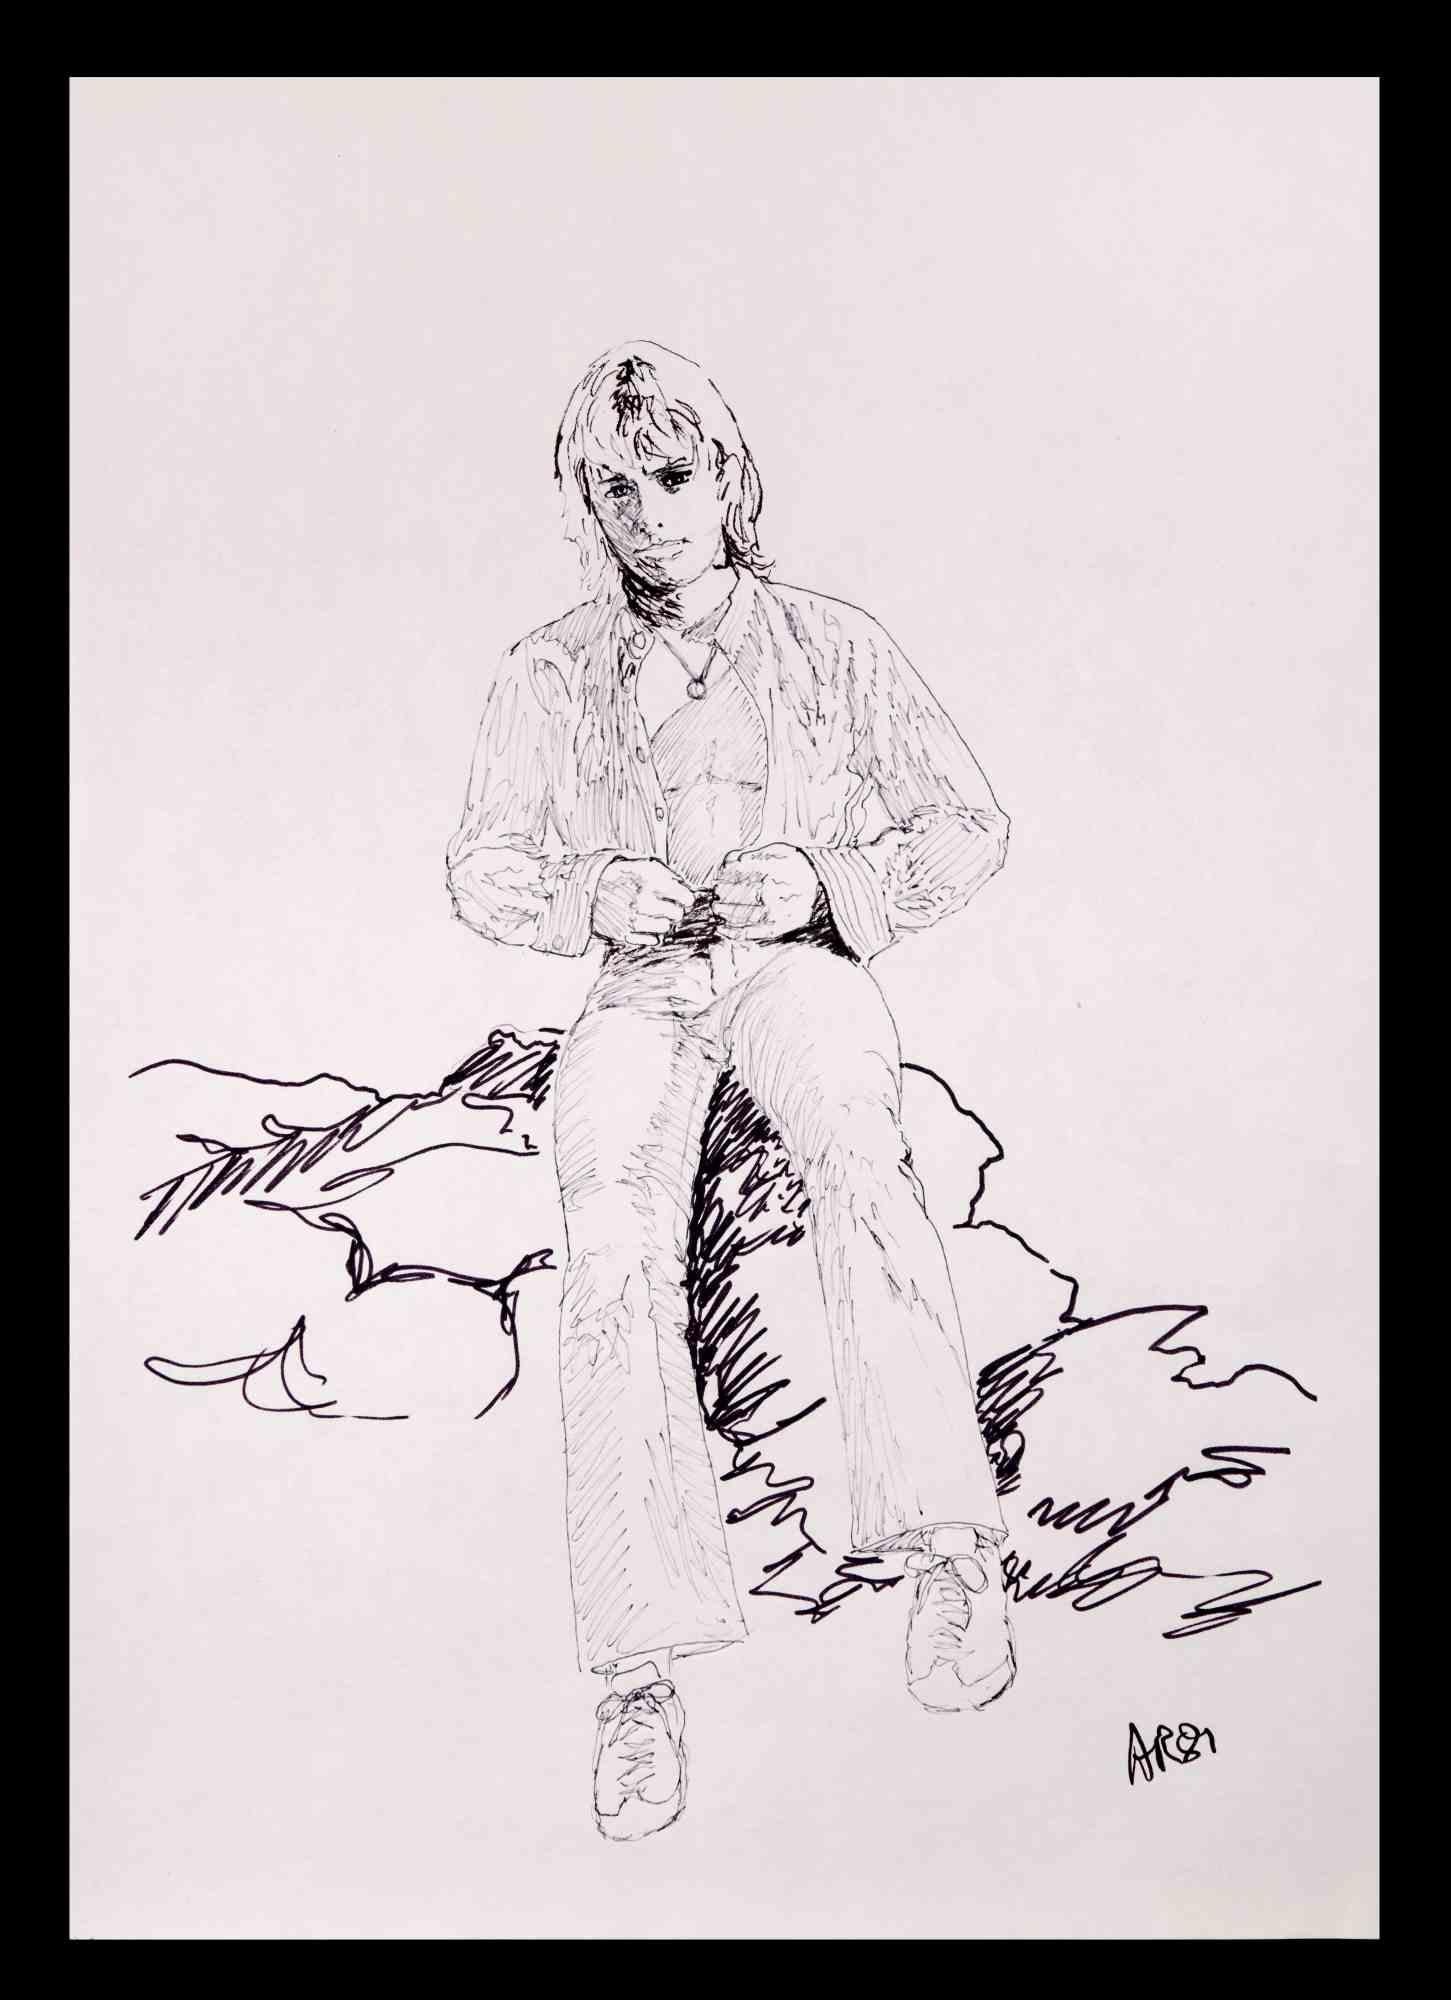 Portrait of a boy  is an original drawing on pencil and pen realized by Anthony Roaland in 1981. Hand-signed and dated by the artist on the lower right margin. 

In the foreground the boy is depicted with a mysterious and intriguing face.

Good